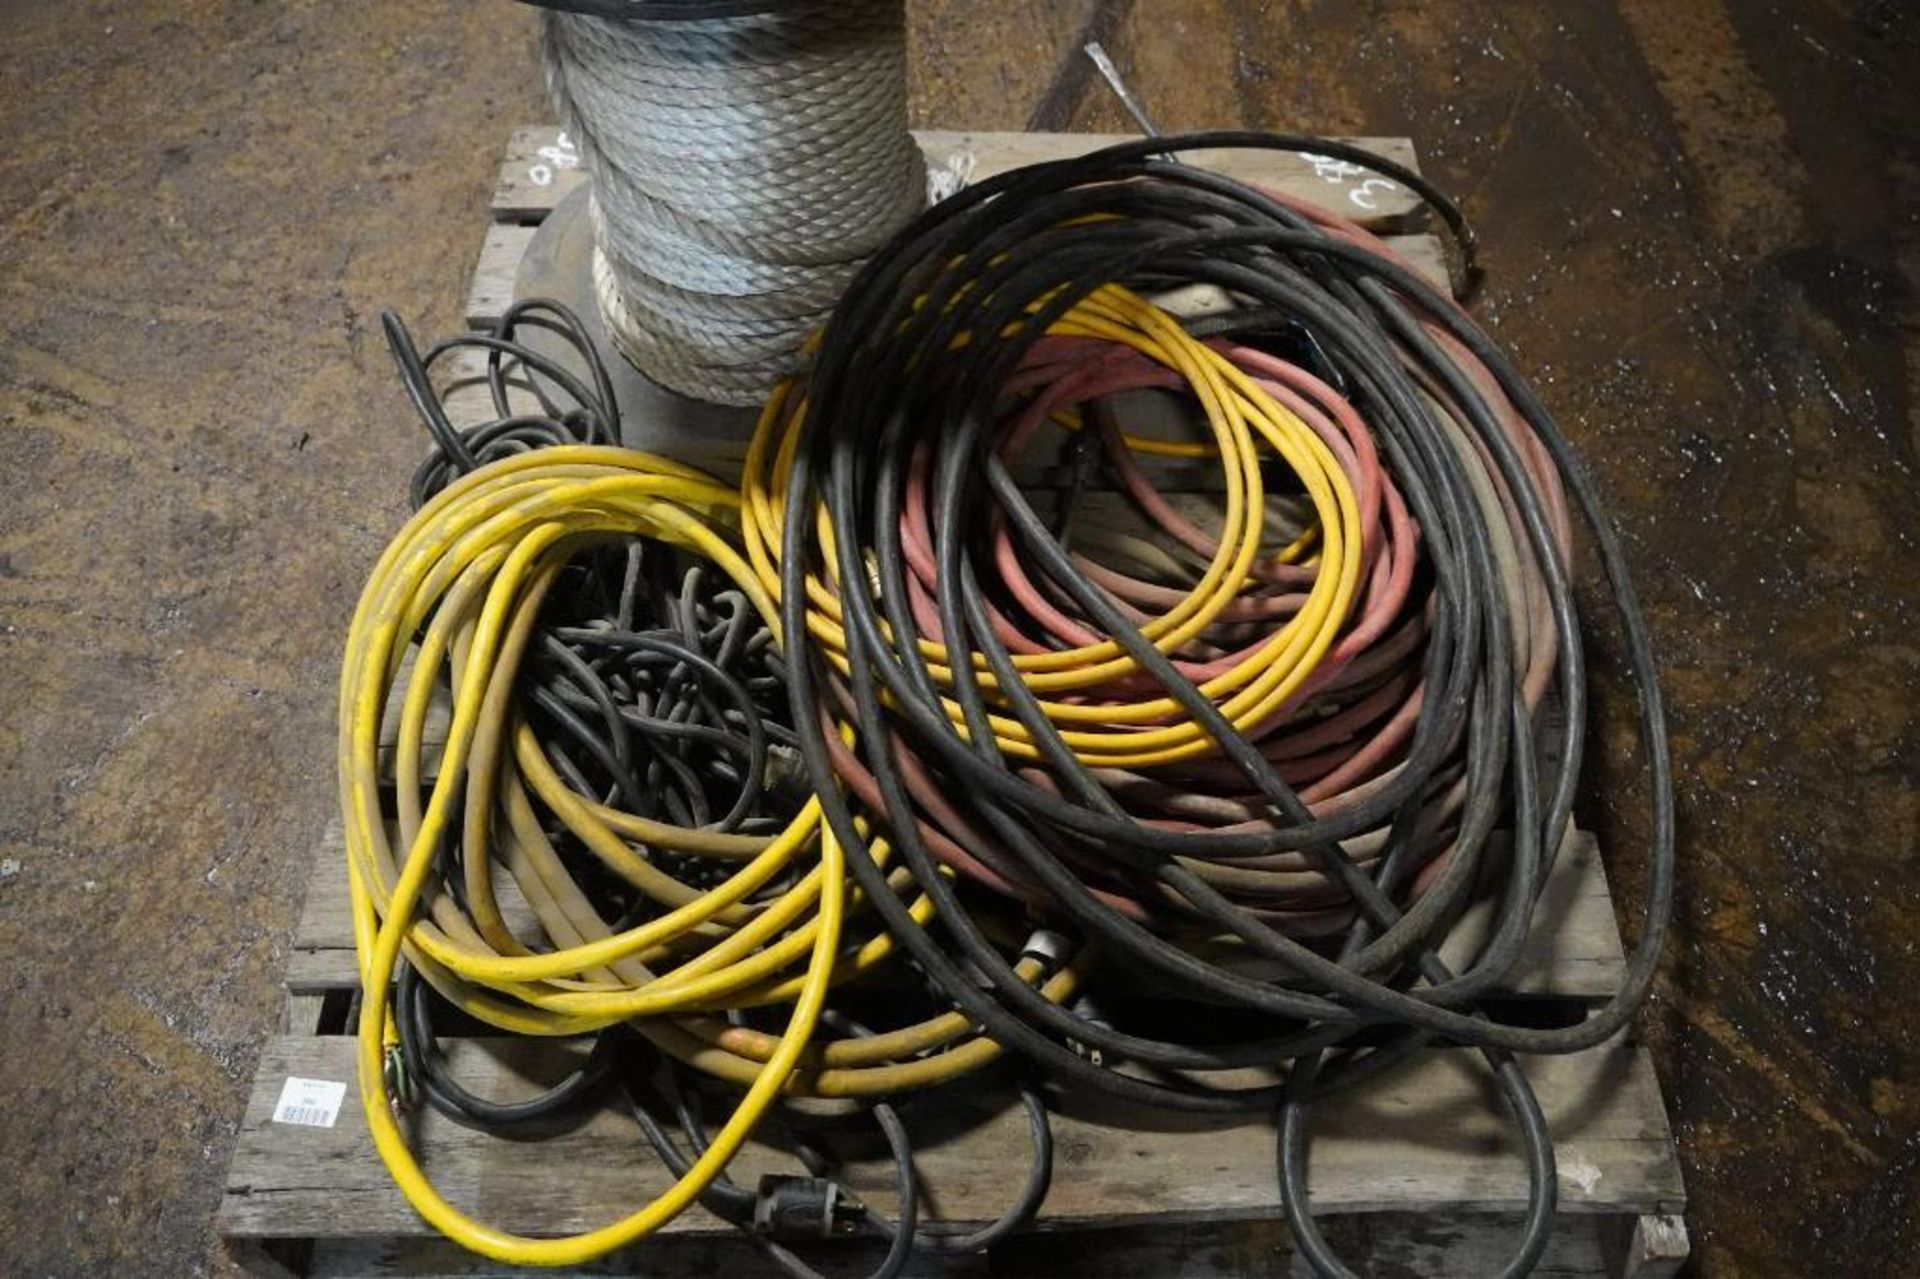 Air Hoses, Extension Cords, & Rope - Image 2 of 7